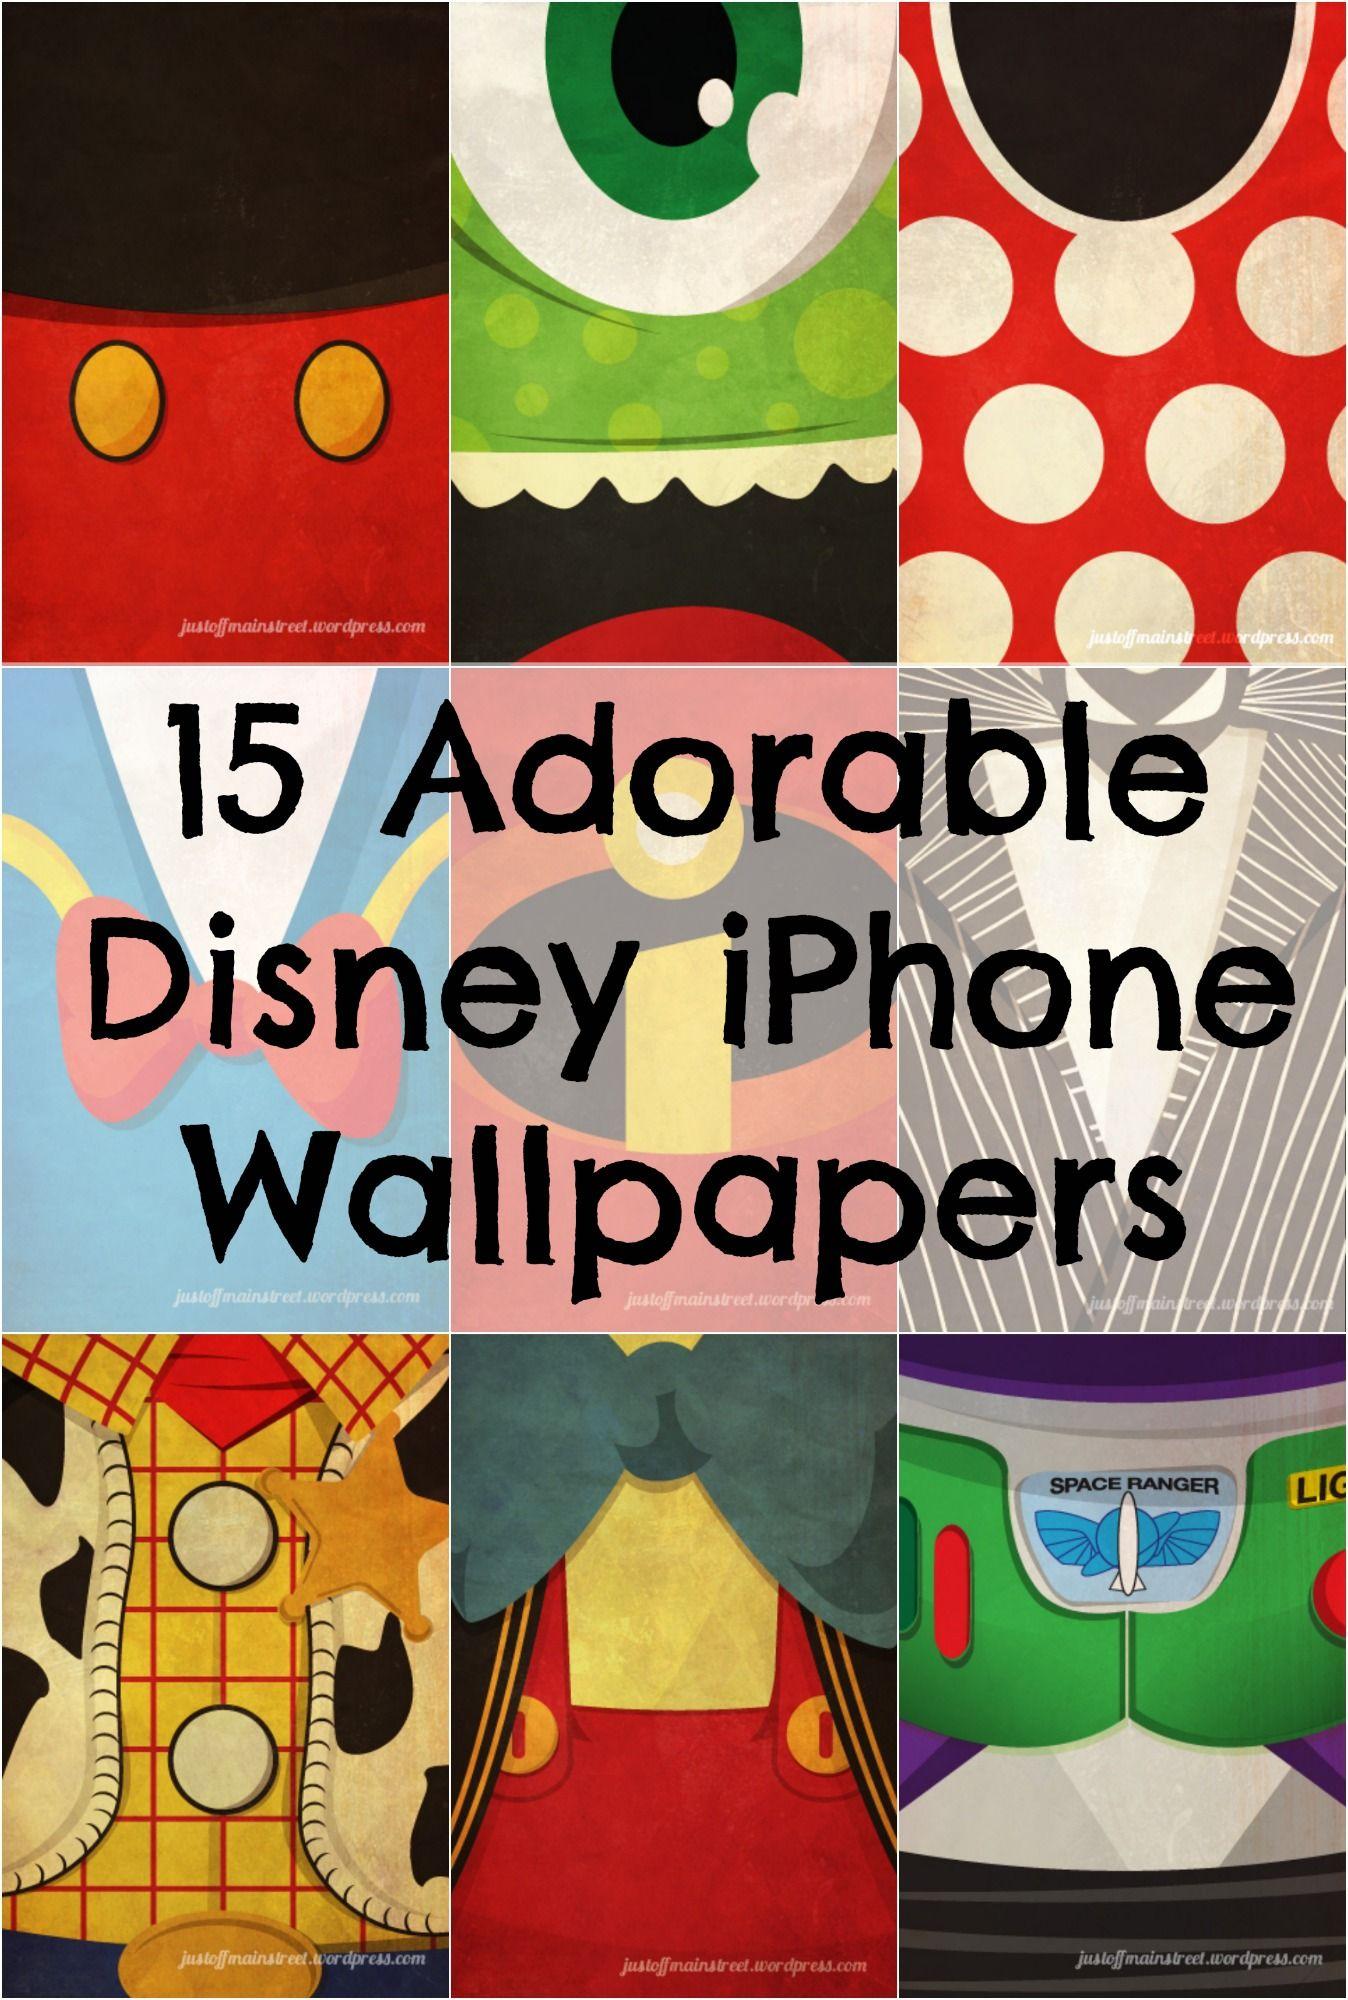 Iconic Disney Characters as iPhone Wallpaper